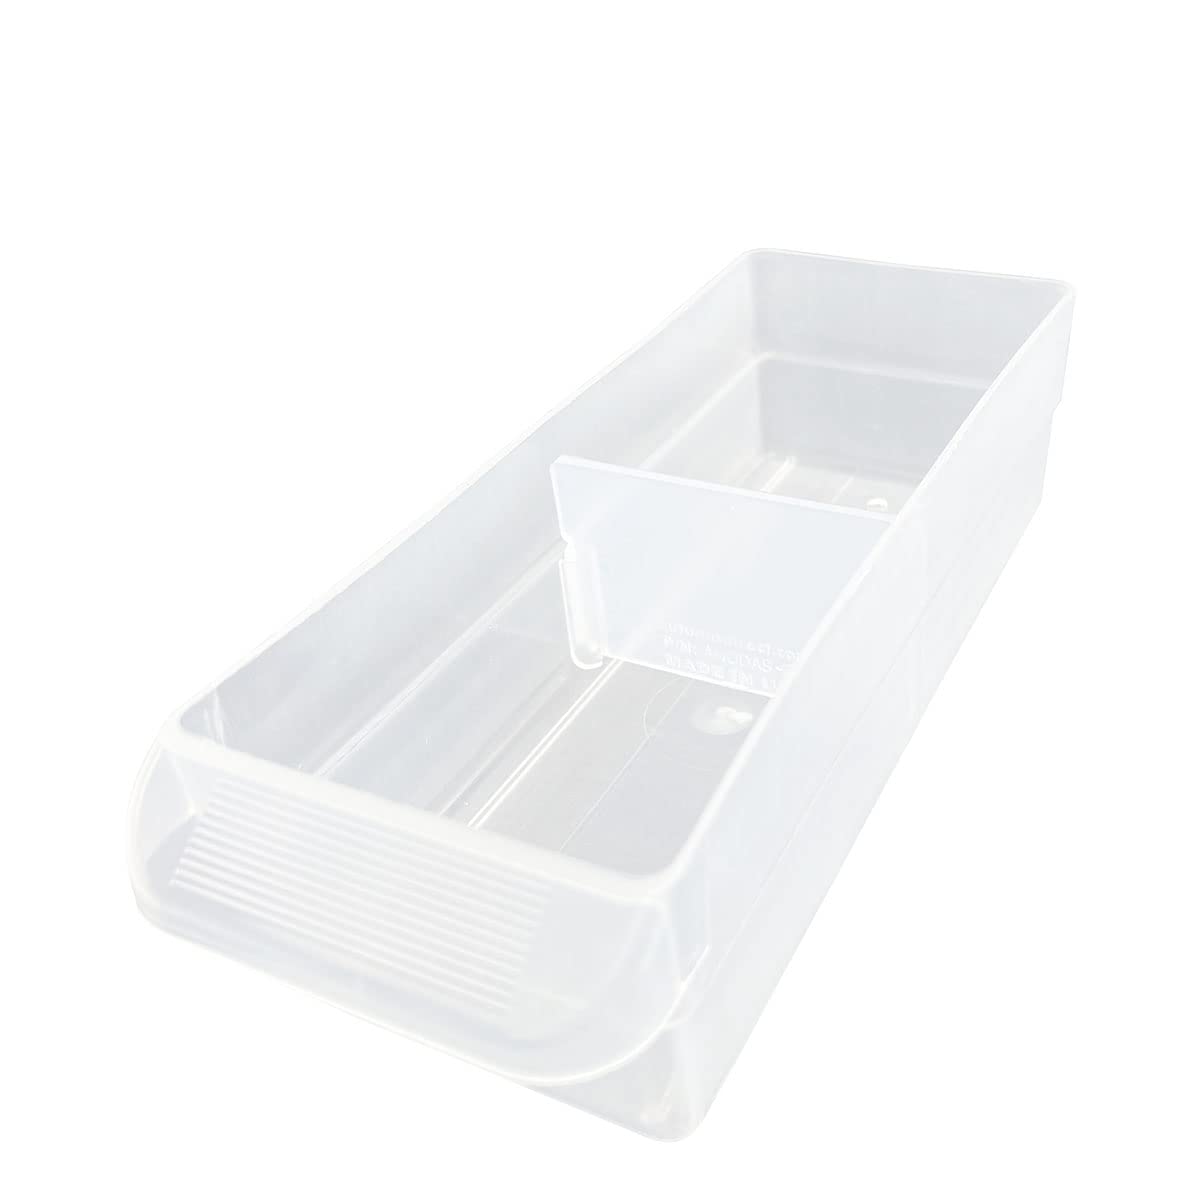 Pack of 32 Divider for Small Drawers Plastic Storage Hardware Cabinet, Compatible with Akro-Mils 40716 (Small Drawer Size)